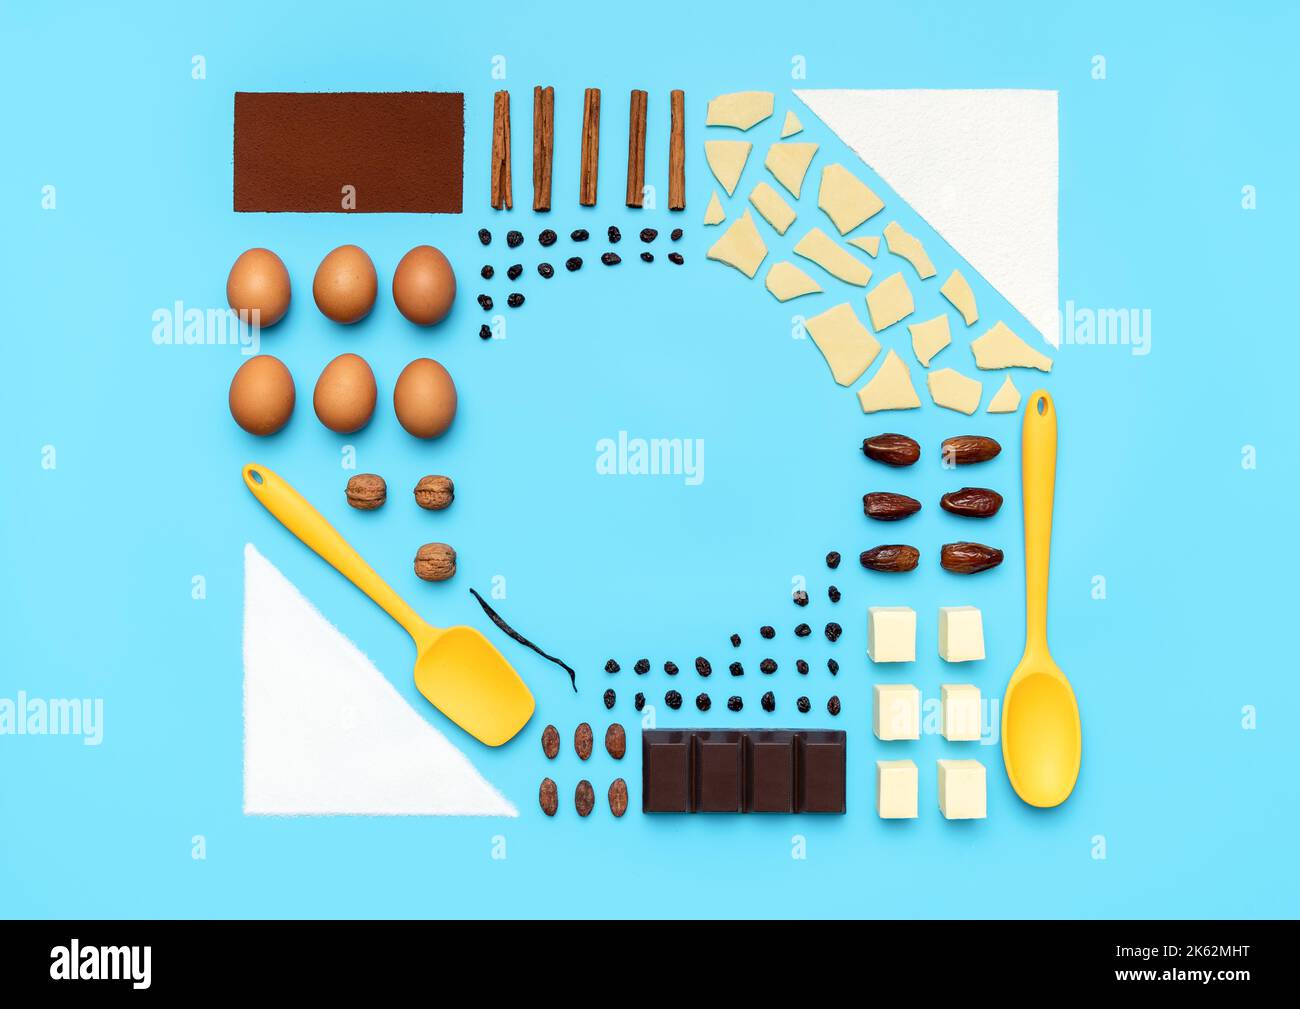 Top view with ingredients and utensils for baking arranged symmetrically on a blue table. Food knolling with ingredients for baking dessert. Stock Photo